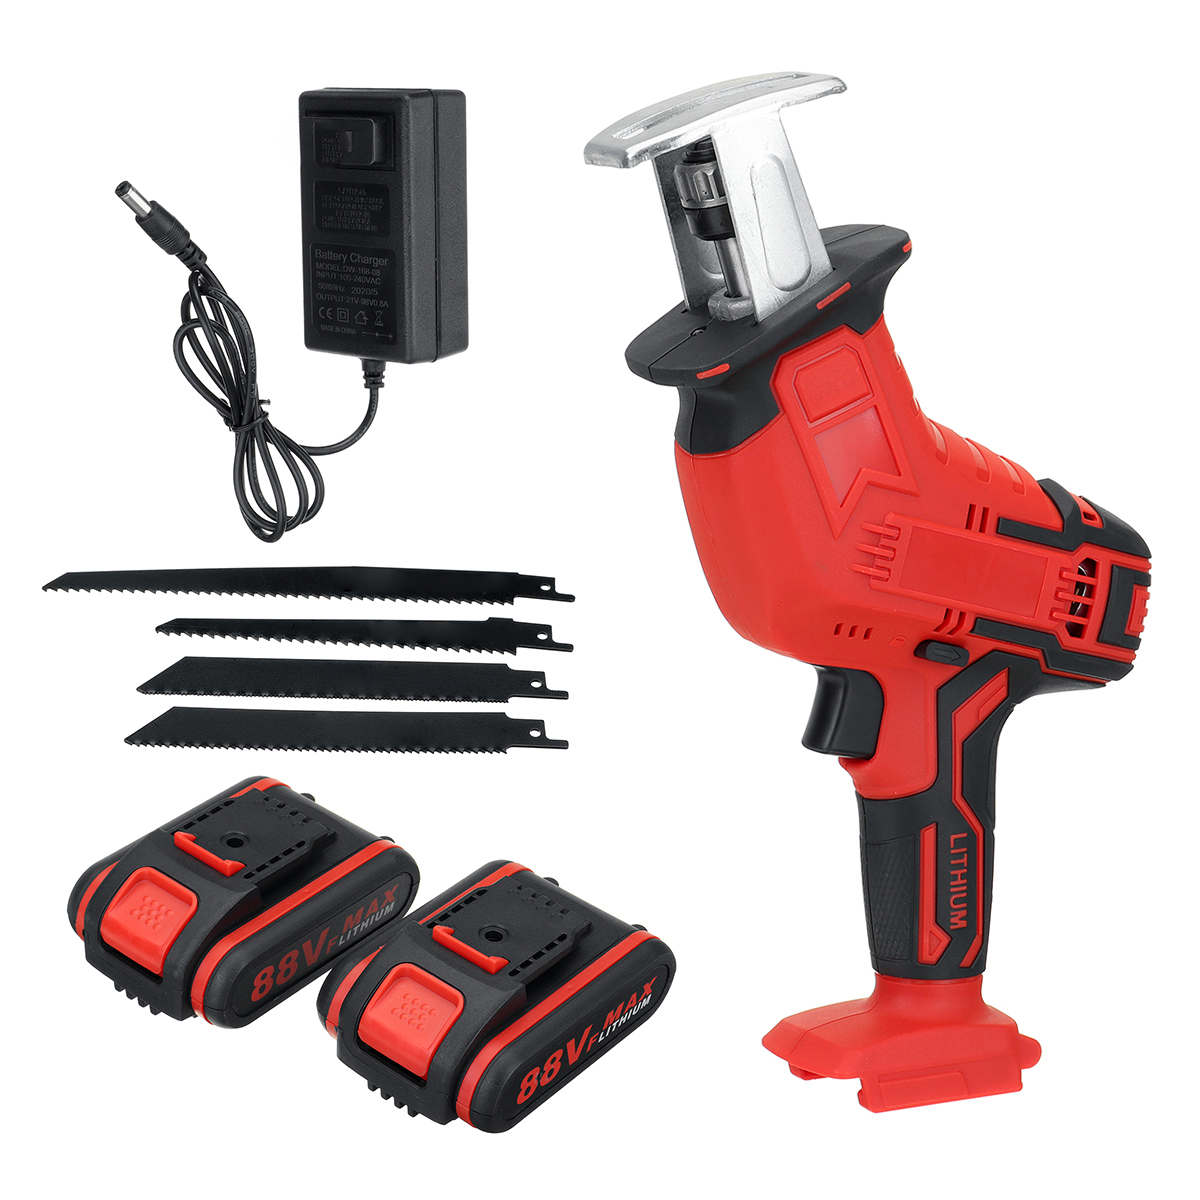 88VF-Cordless-Electric-Reciprocating-Saw-Outdoor-Portable-Woodworking-Tool-One-Hand-Saw-W-12-Battery-1883228-13